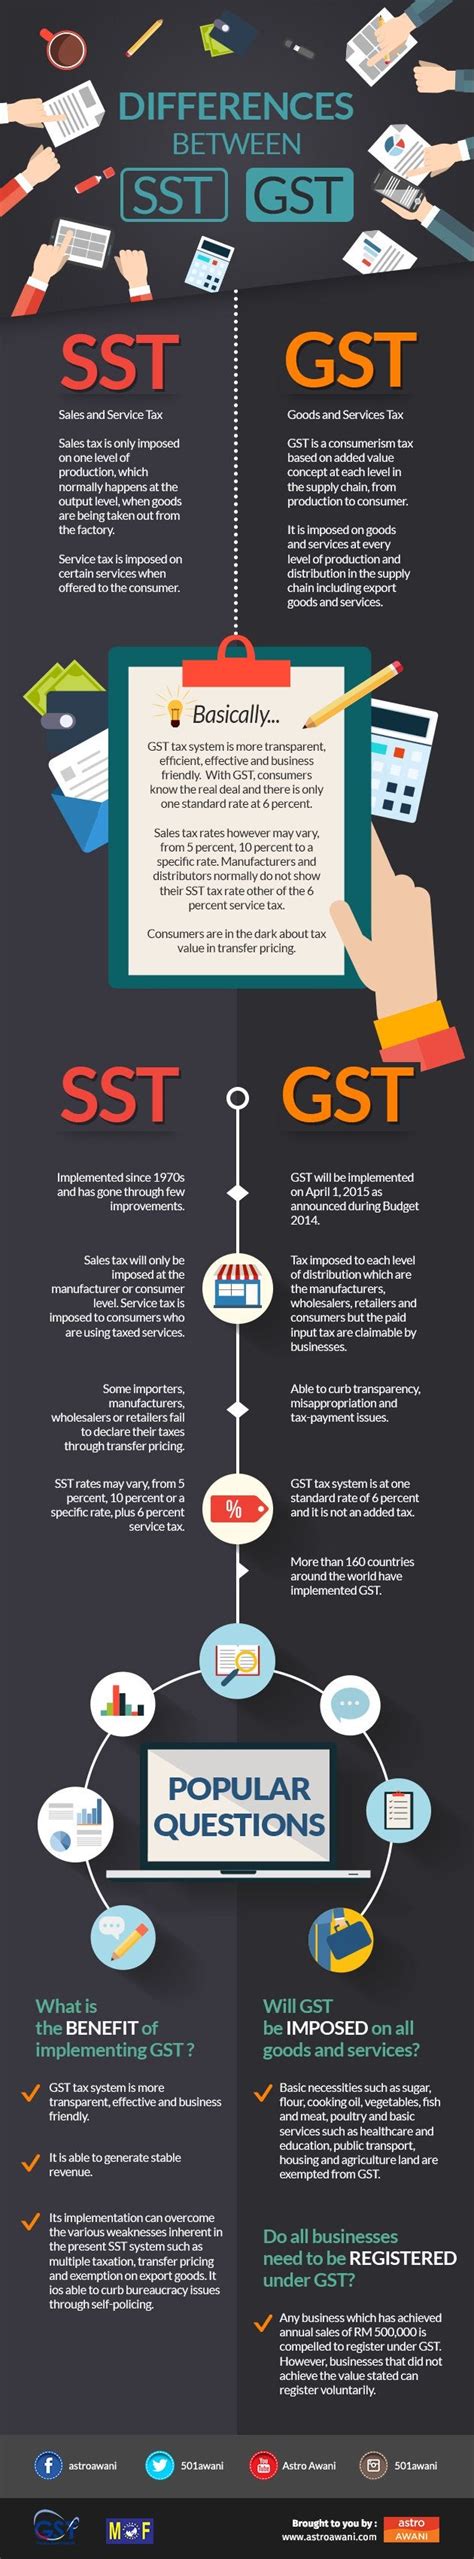 Sst is taking over gst! The differences between GST and SST : malaysia